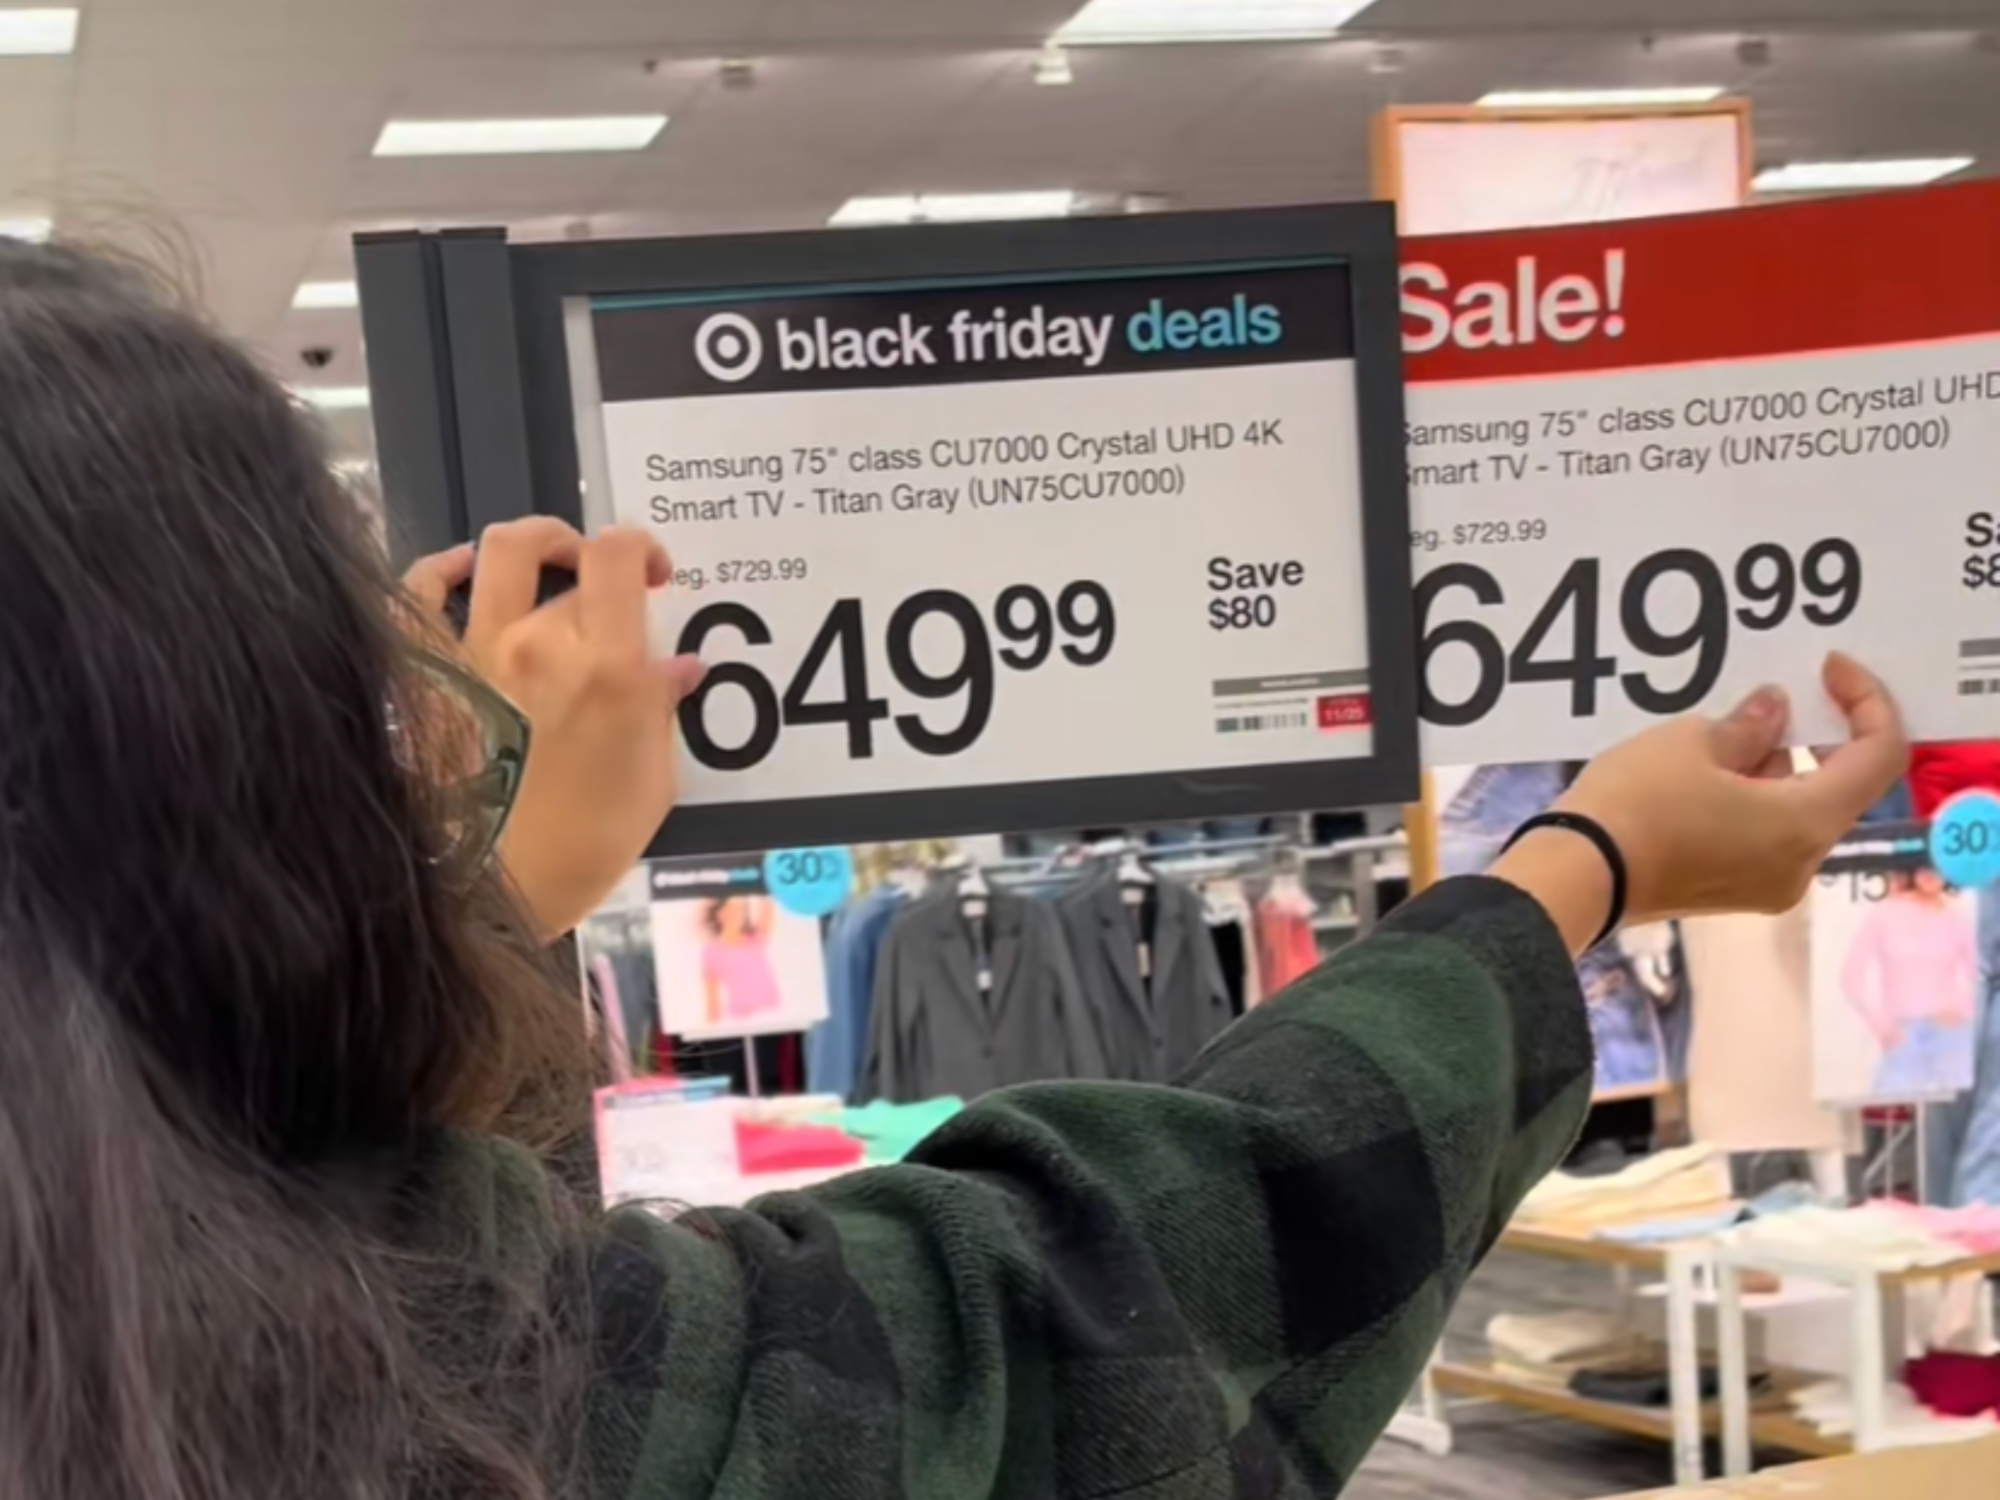 Viral TikTok on Target's Black Friday TV 'Deal' Shows Shoppers Are Smart -  Bloomberg